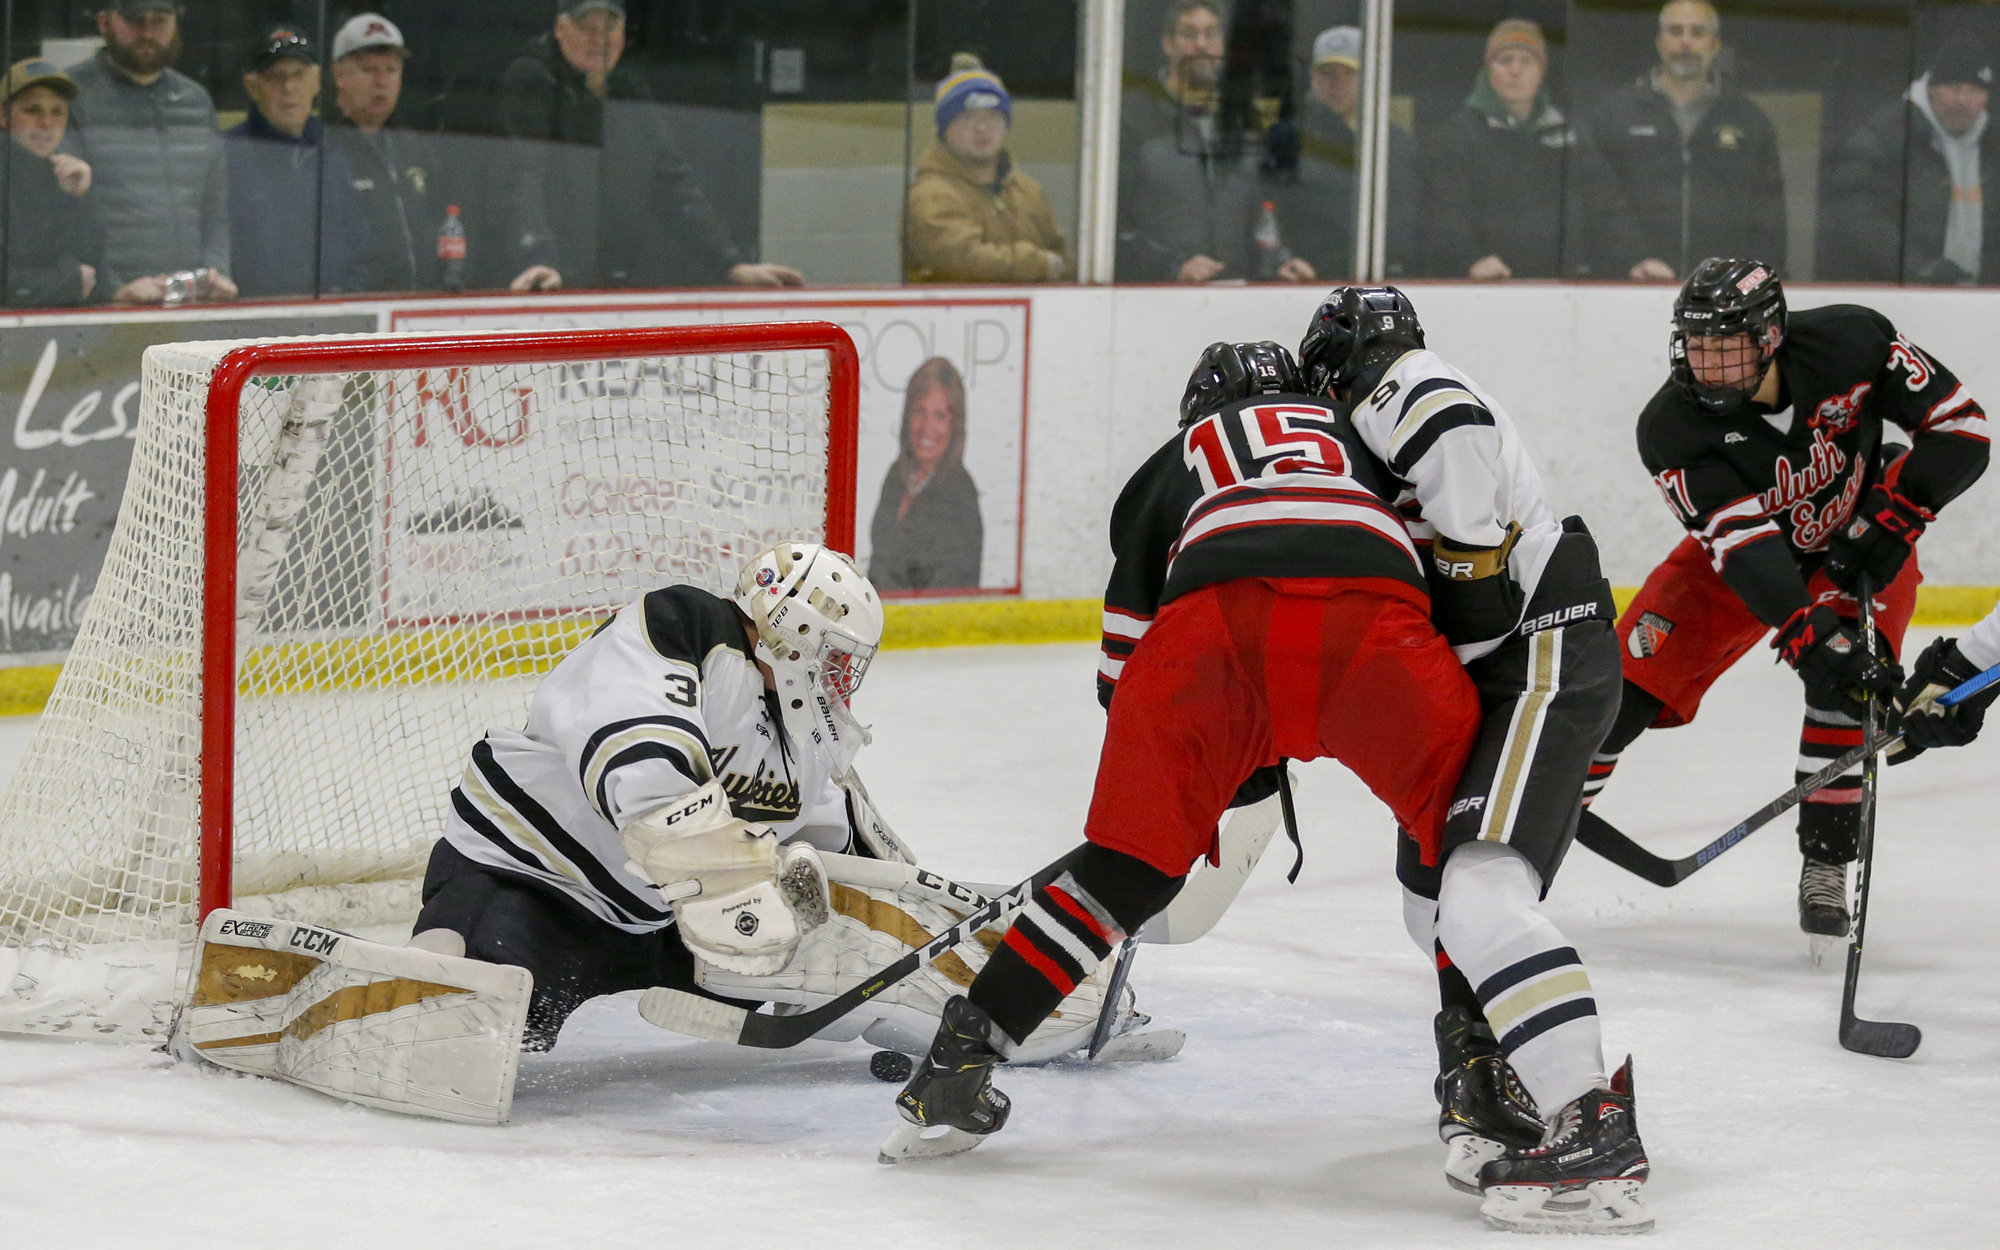 Andover's Ben Fritsinger stretches to make a second period save against Duluth East. Fritsinger had 35 saves in the Huskies' 2-1 overtime victory over